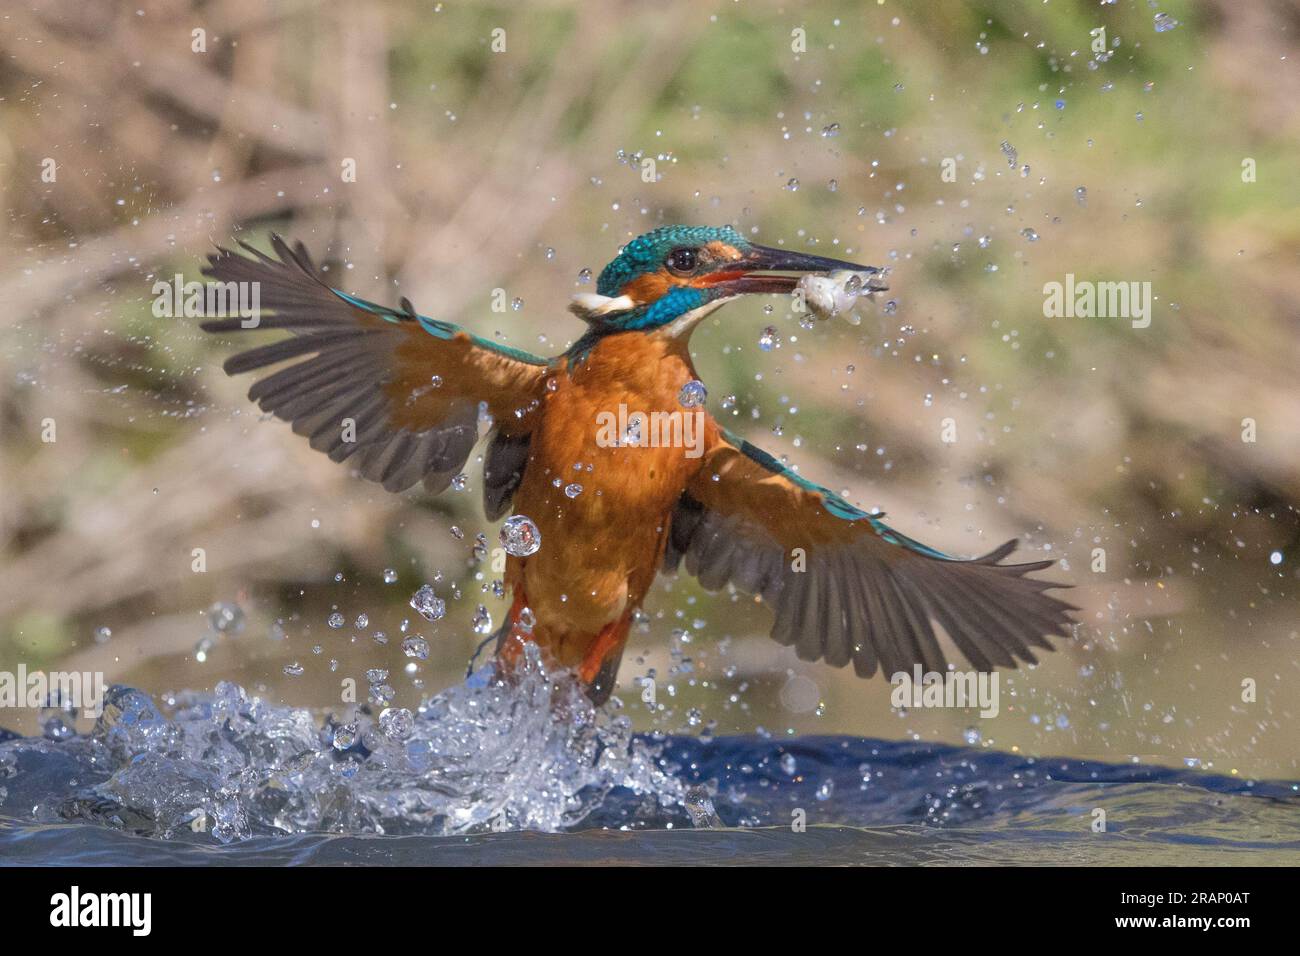 The kingfisher making his catch BEDFORDSHIRE, ENGLAND STUNNING IMAGES taken by a dogwalker show a kingfisher smashing into water as it homed in on it? Stock Photo